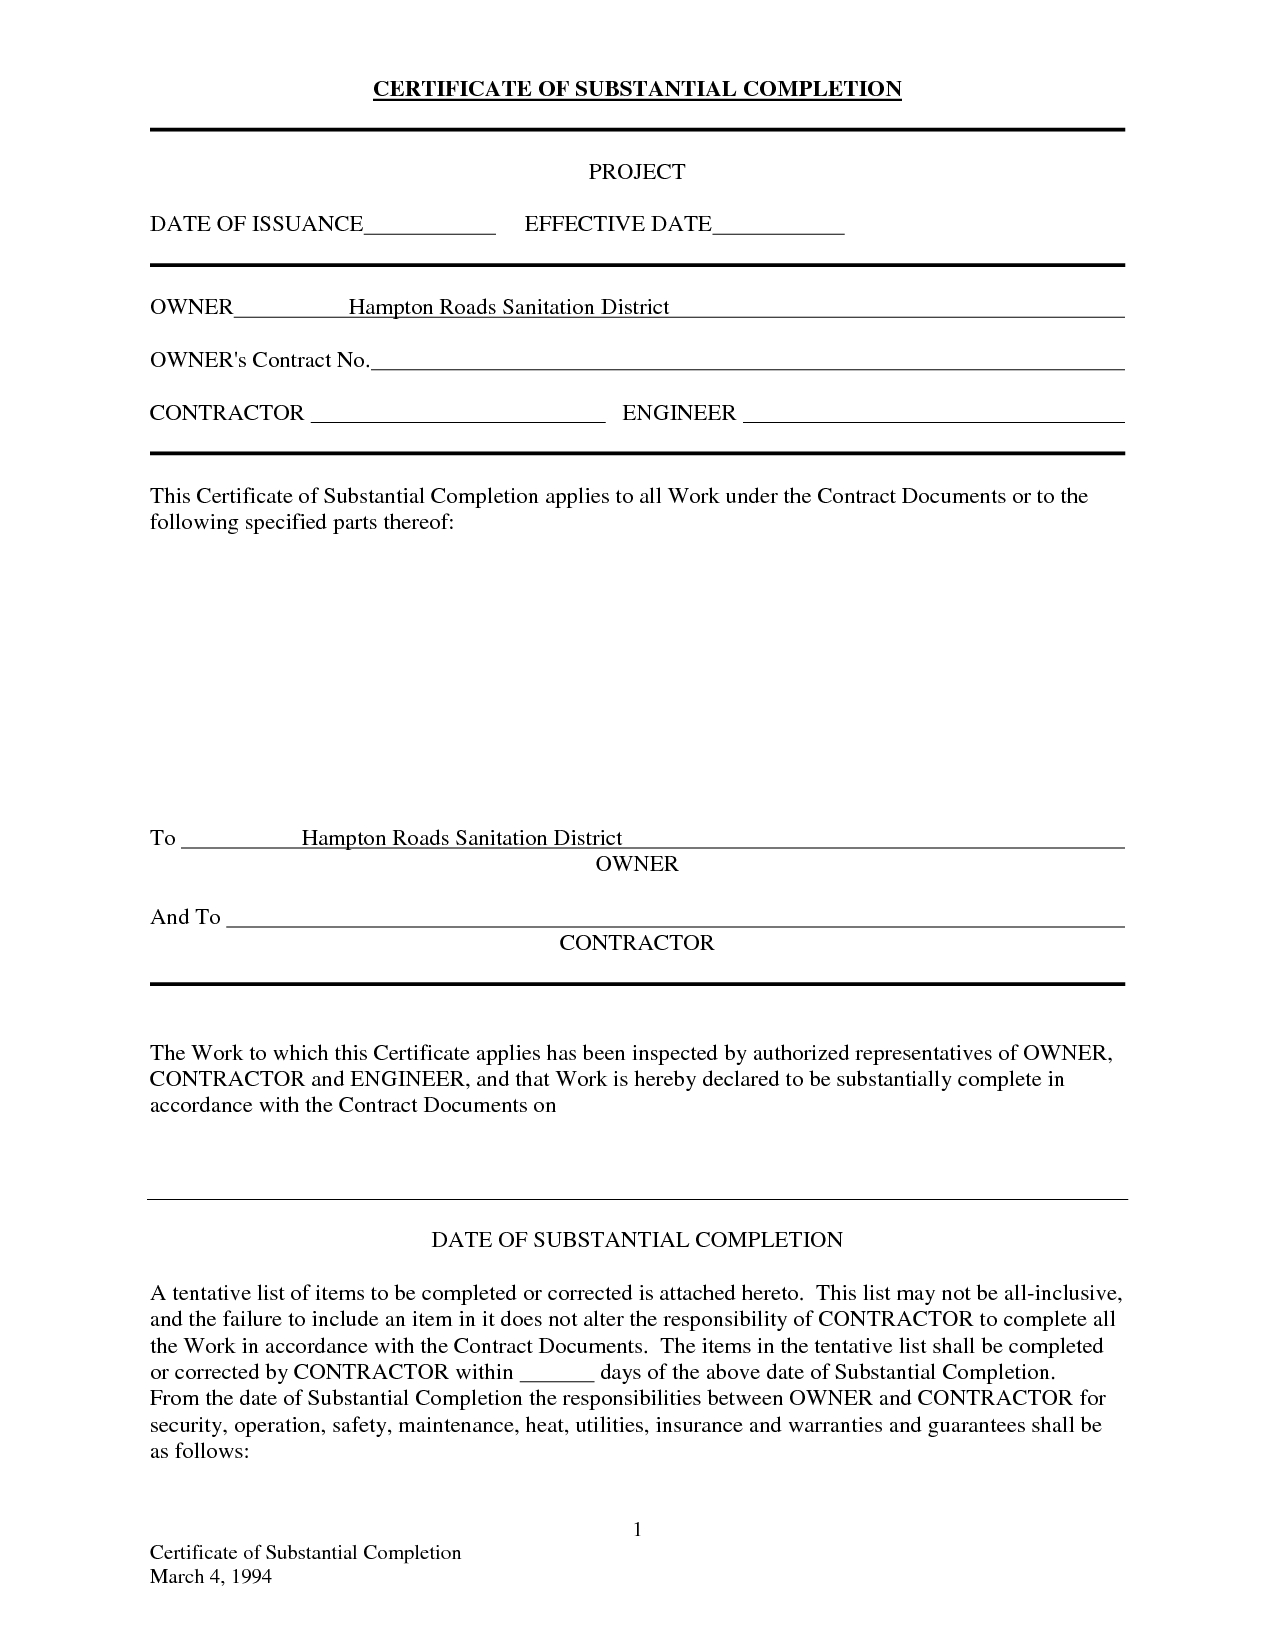 Letter Of Substantial Completion – Free Printable Documents Within Certificate Of Substantial Completion Template